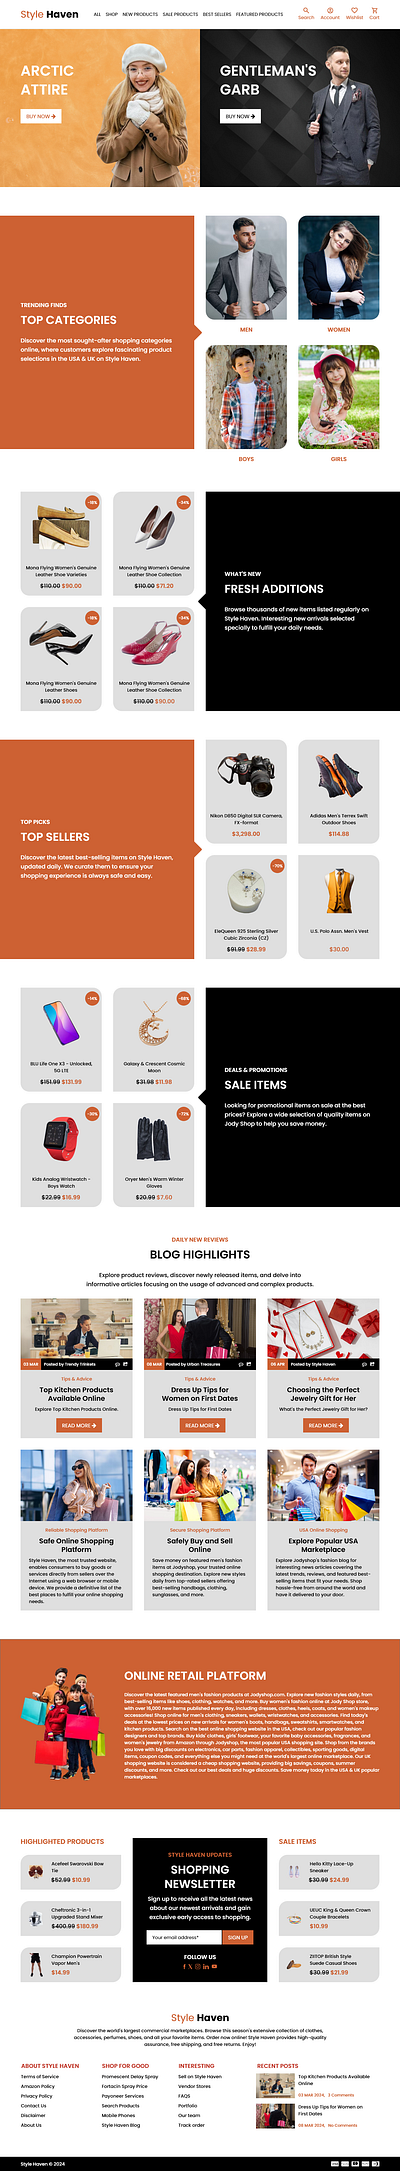 Shopping Website Landing Page Design ecommerce website design ecommerce website landing page ecommerce website ui landing page design shopping website shopping website design shopping website landing page